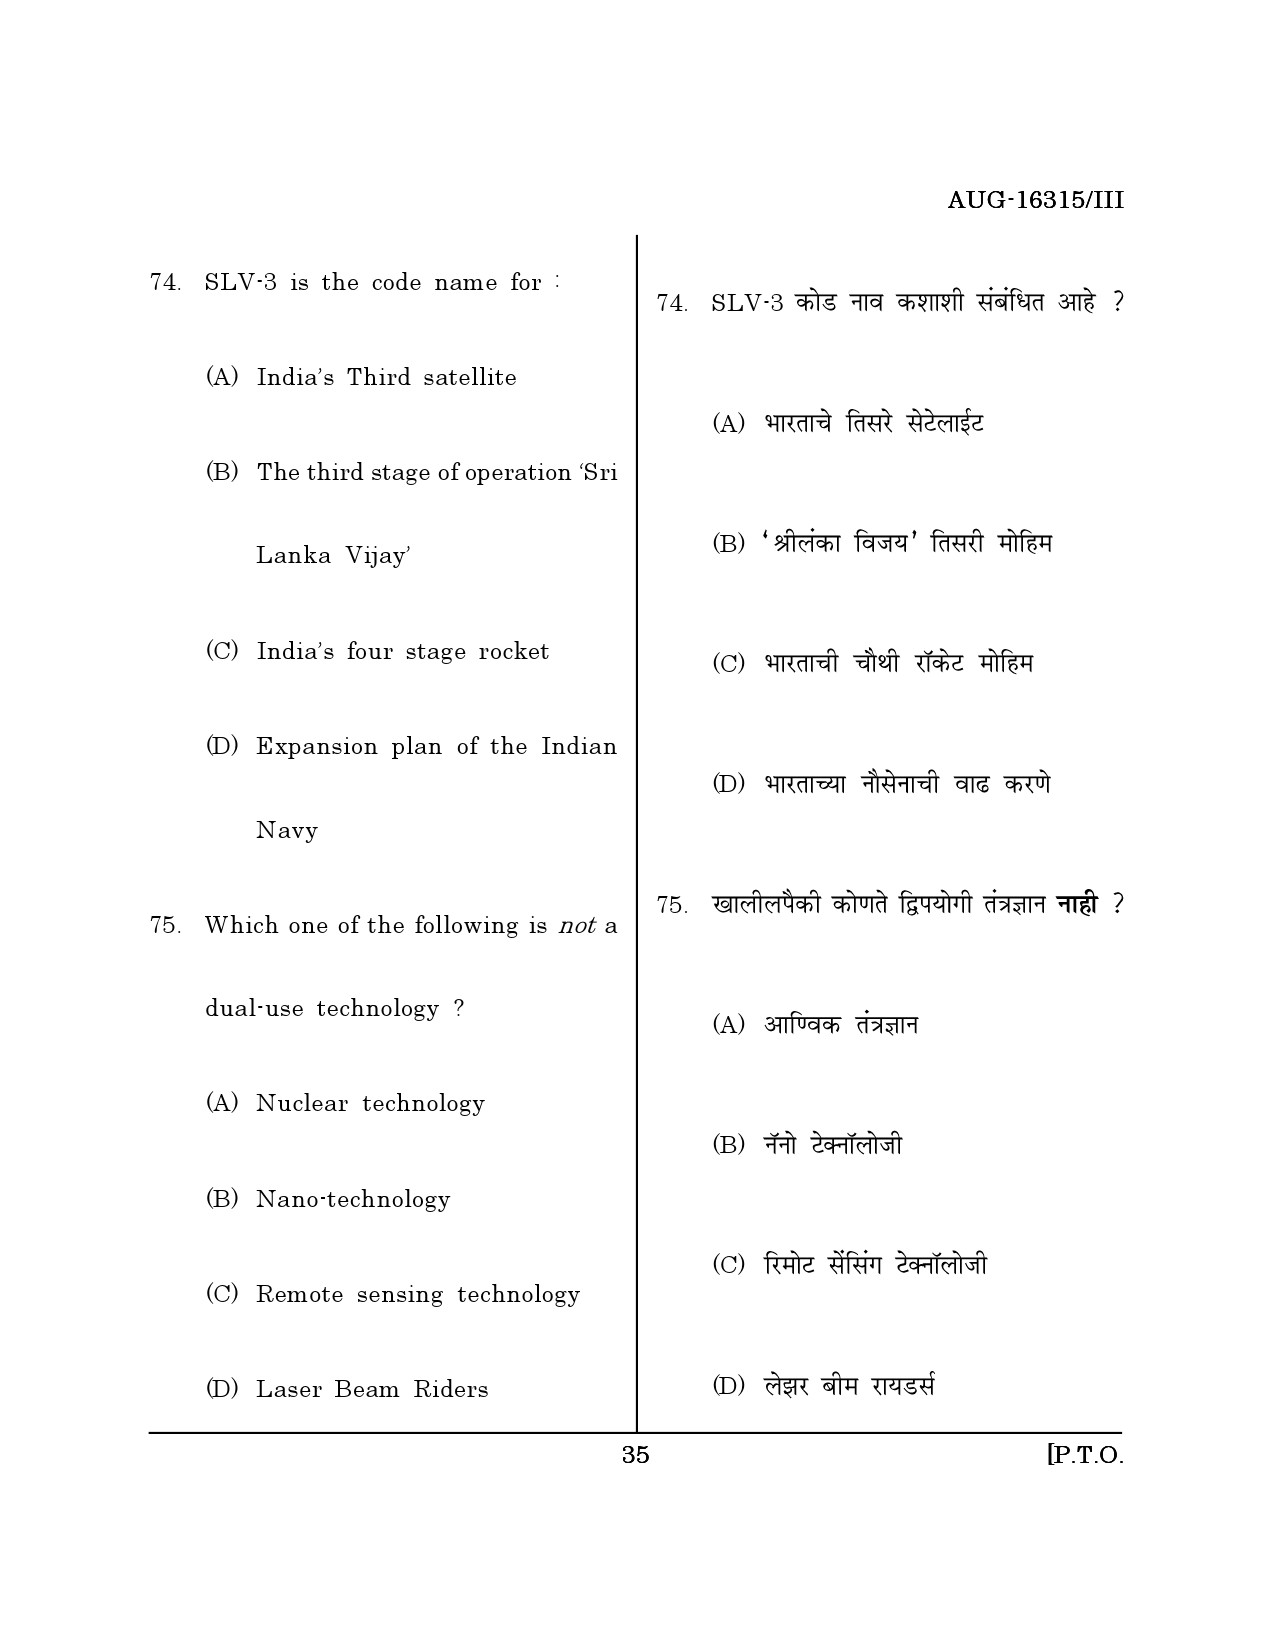 Maharashtra SET Defence and Strategic Studies Question Paper III August 2015 34